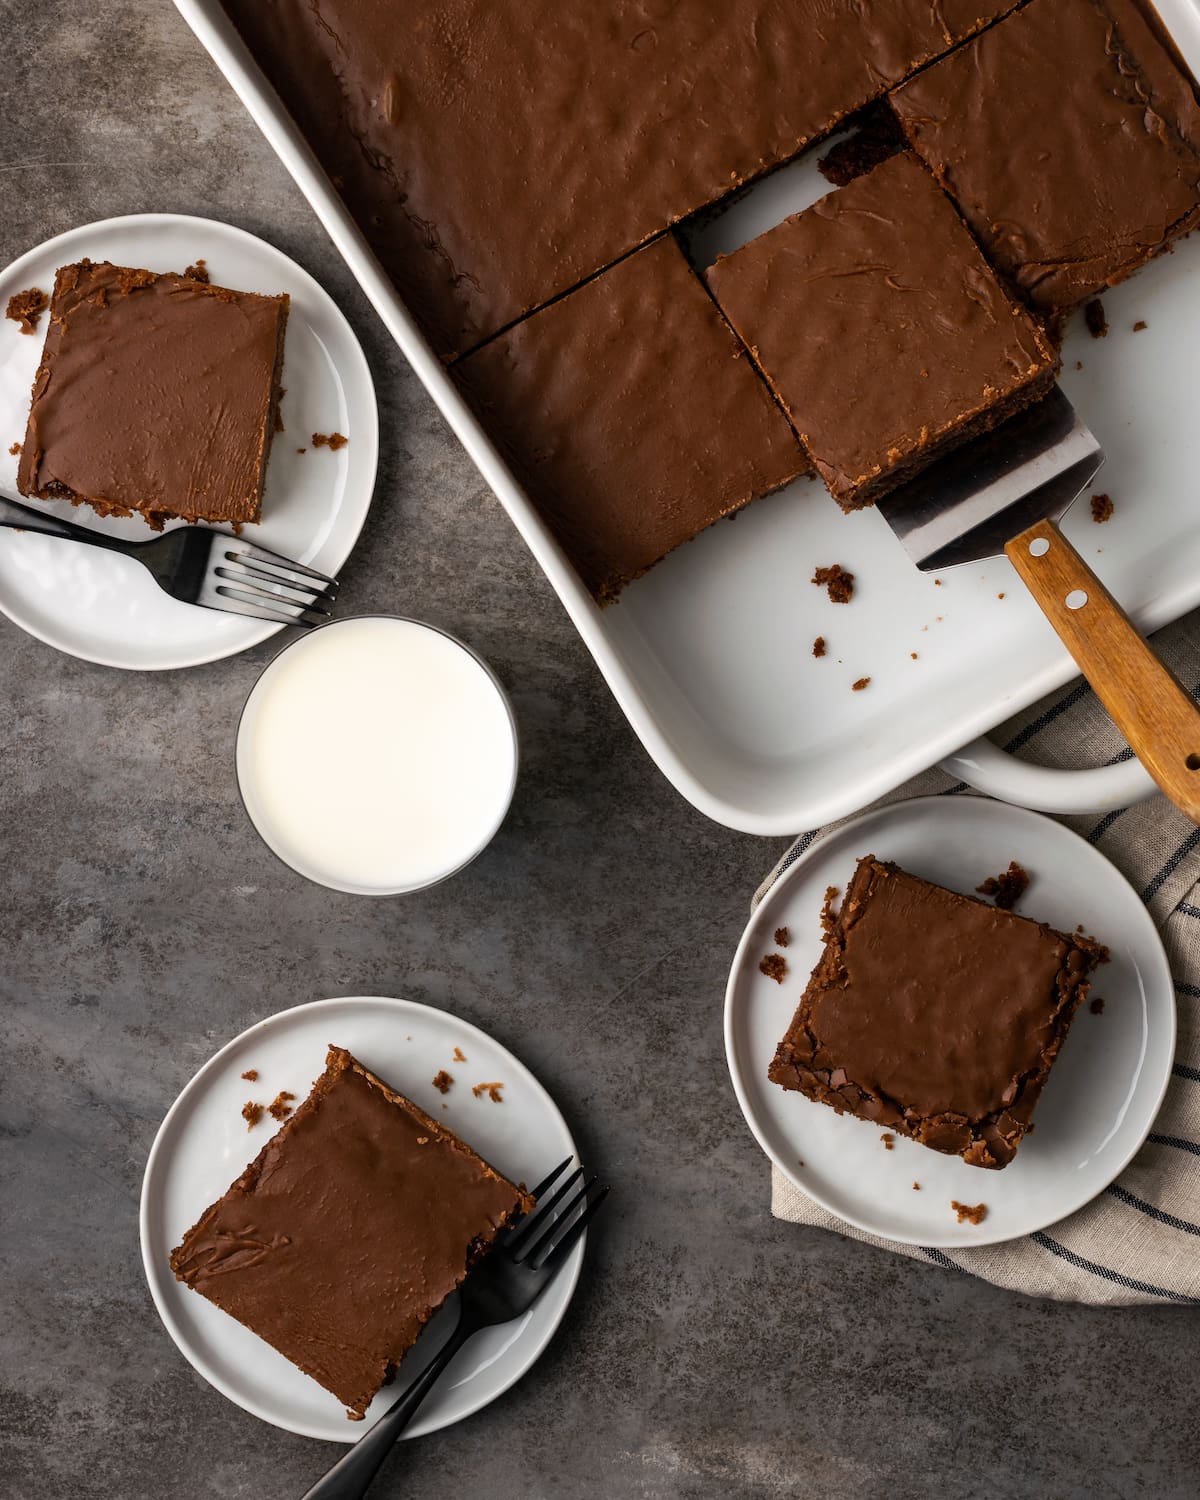 Overhead view of slices of chocolate sheet cake served on plates next to more cake in a baking dish.